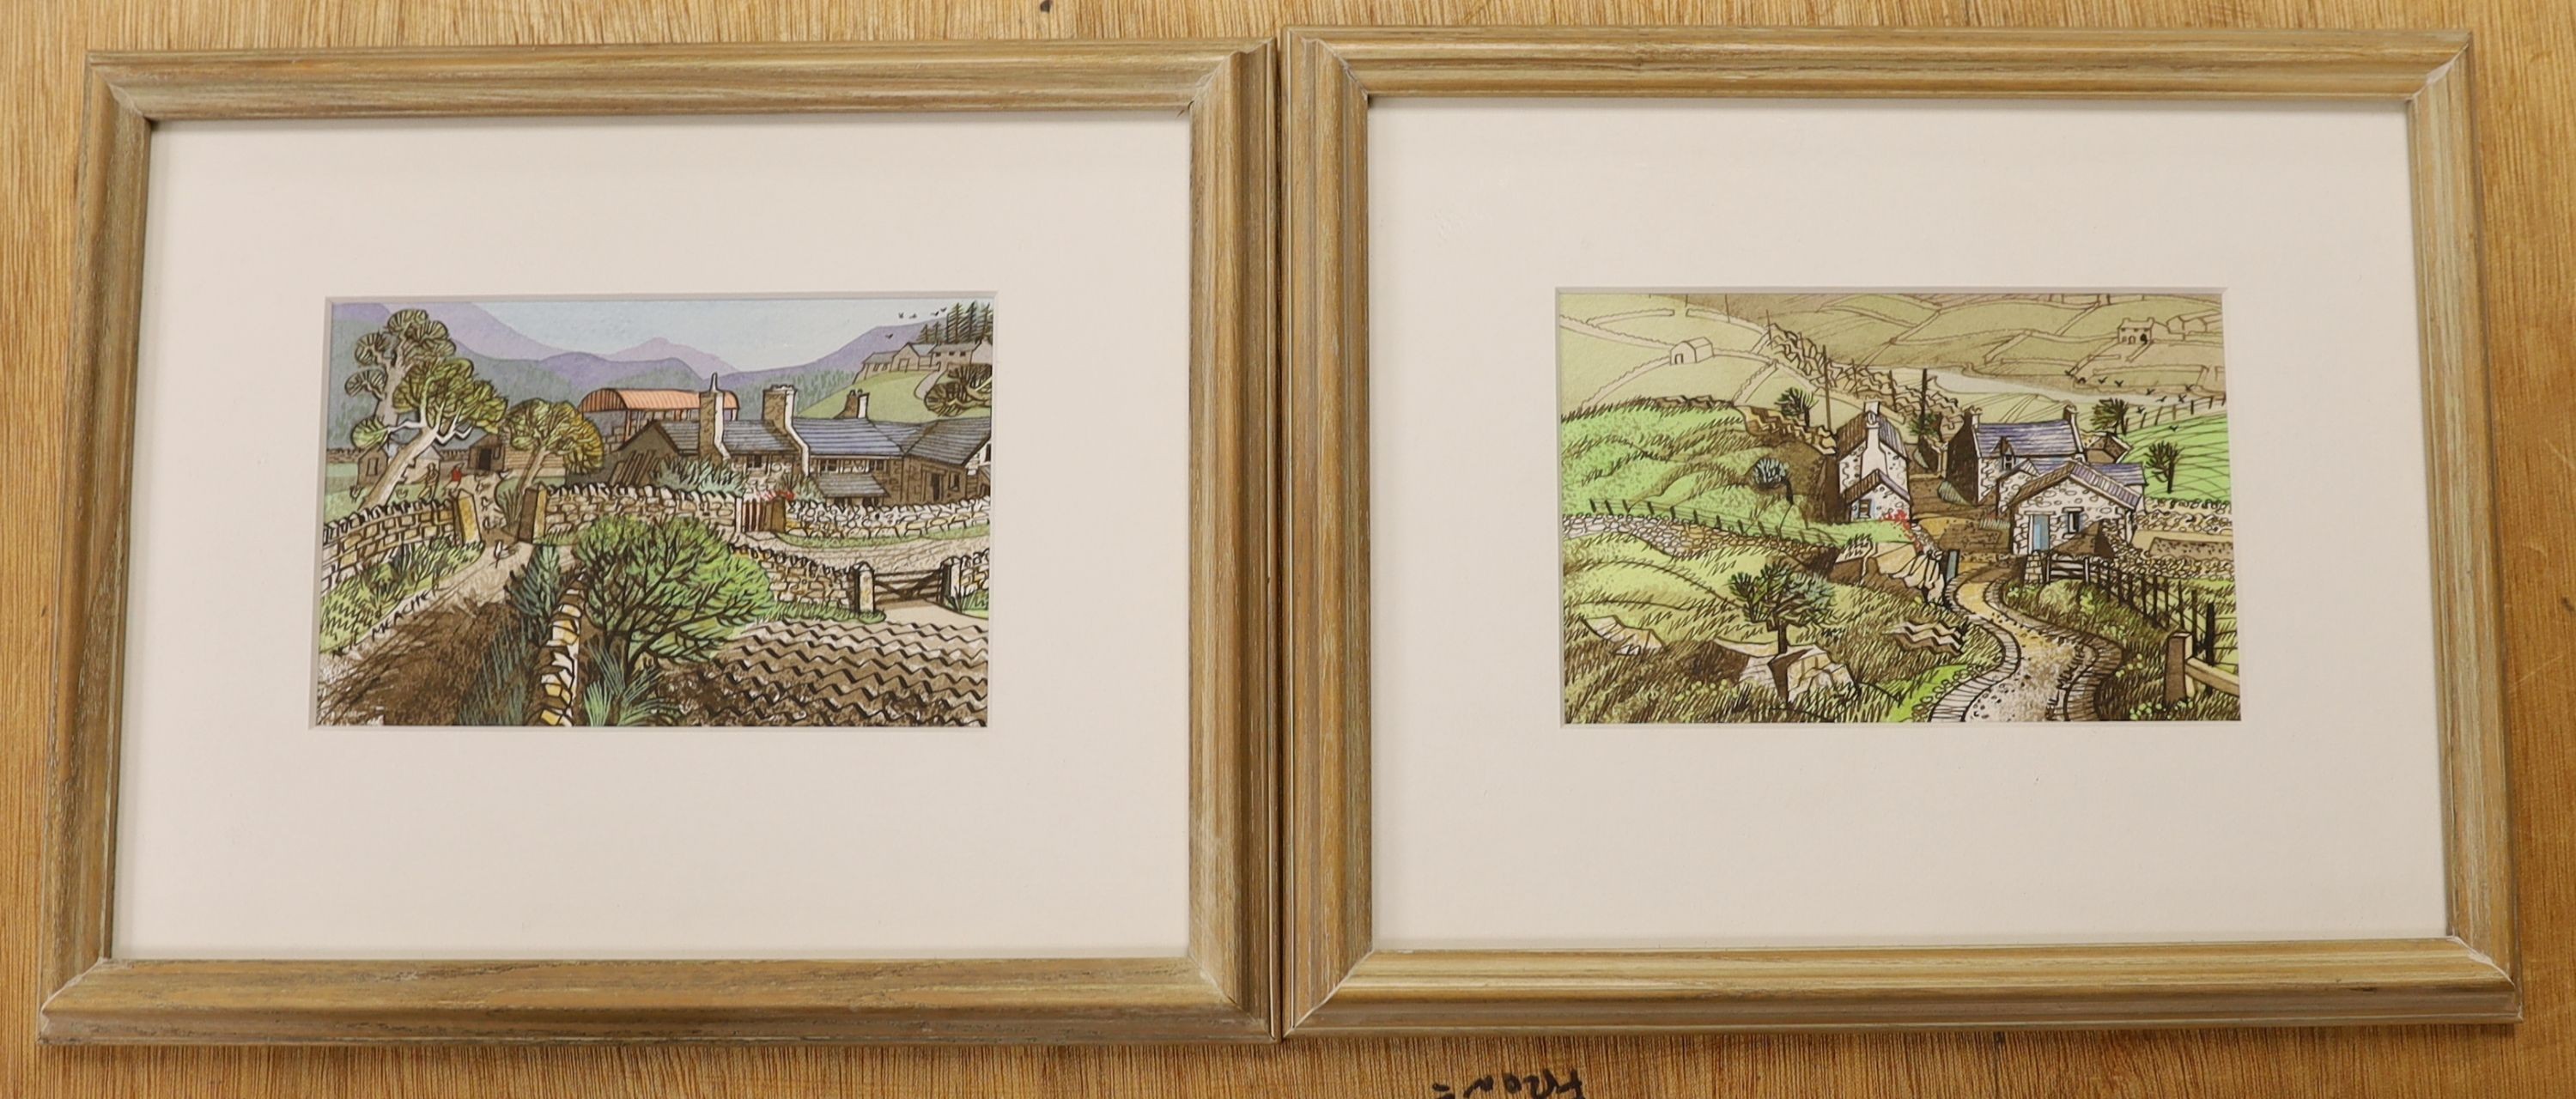 Neil Meacher (1934-2010), two ink and watercolours, 'Feeding Time', signed and inscribed verso 10x16cm and 'Welsh Farm, Snowdonia', signed and inscribed verso 10x16cm